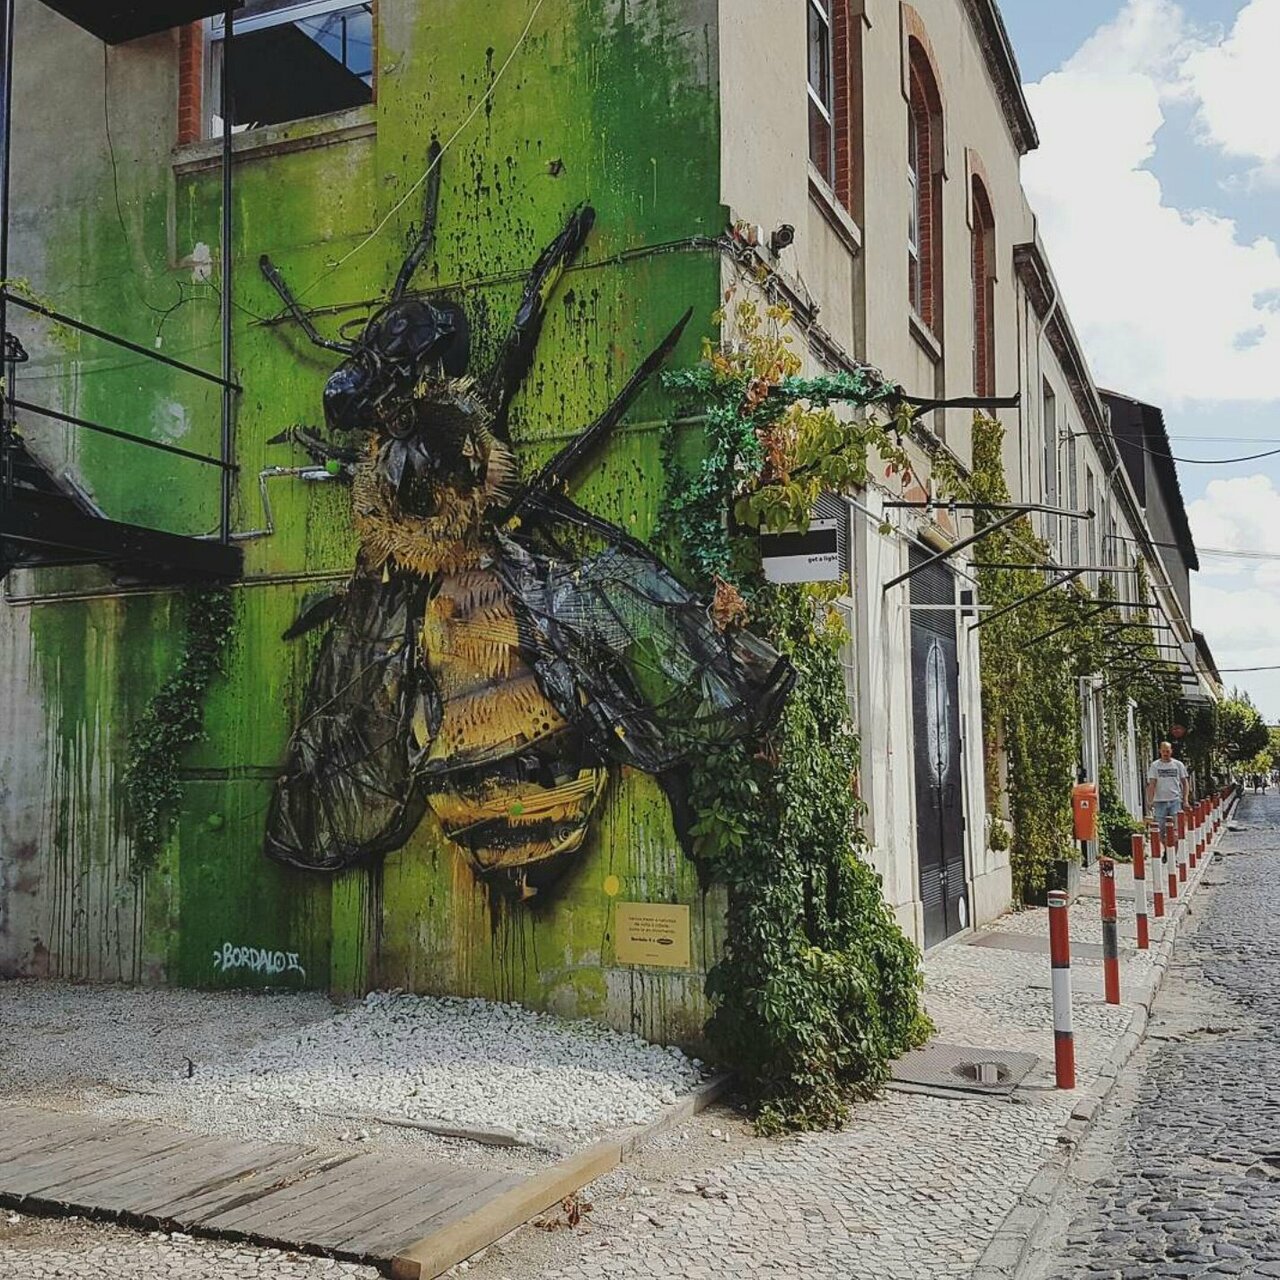 Found a quirky street in #Lisbon - lots of cool bars.. & a #cafe adorned with a #giant #bee  #streetart #Portugal https://t.co/afHqhkfVA1